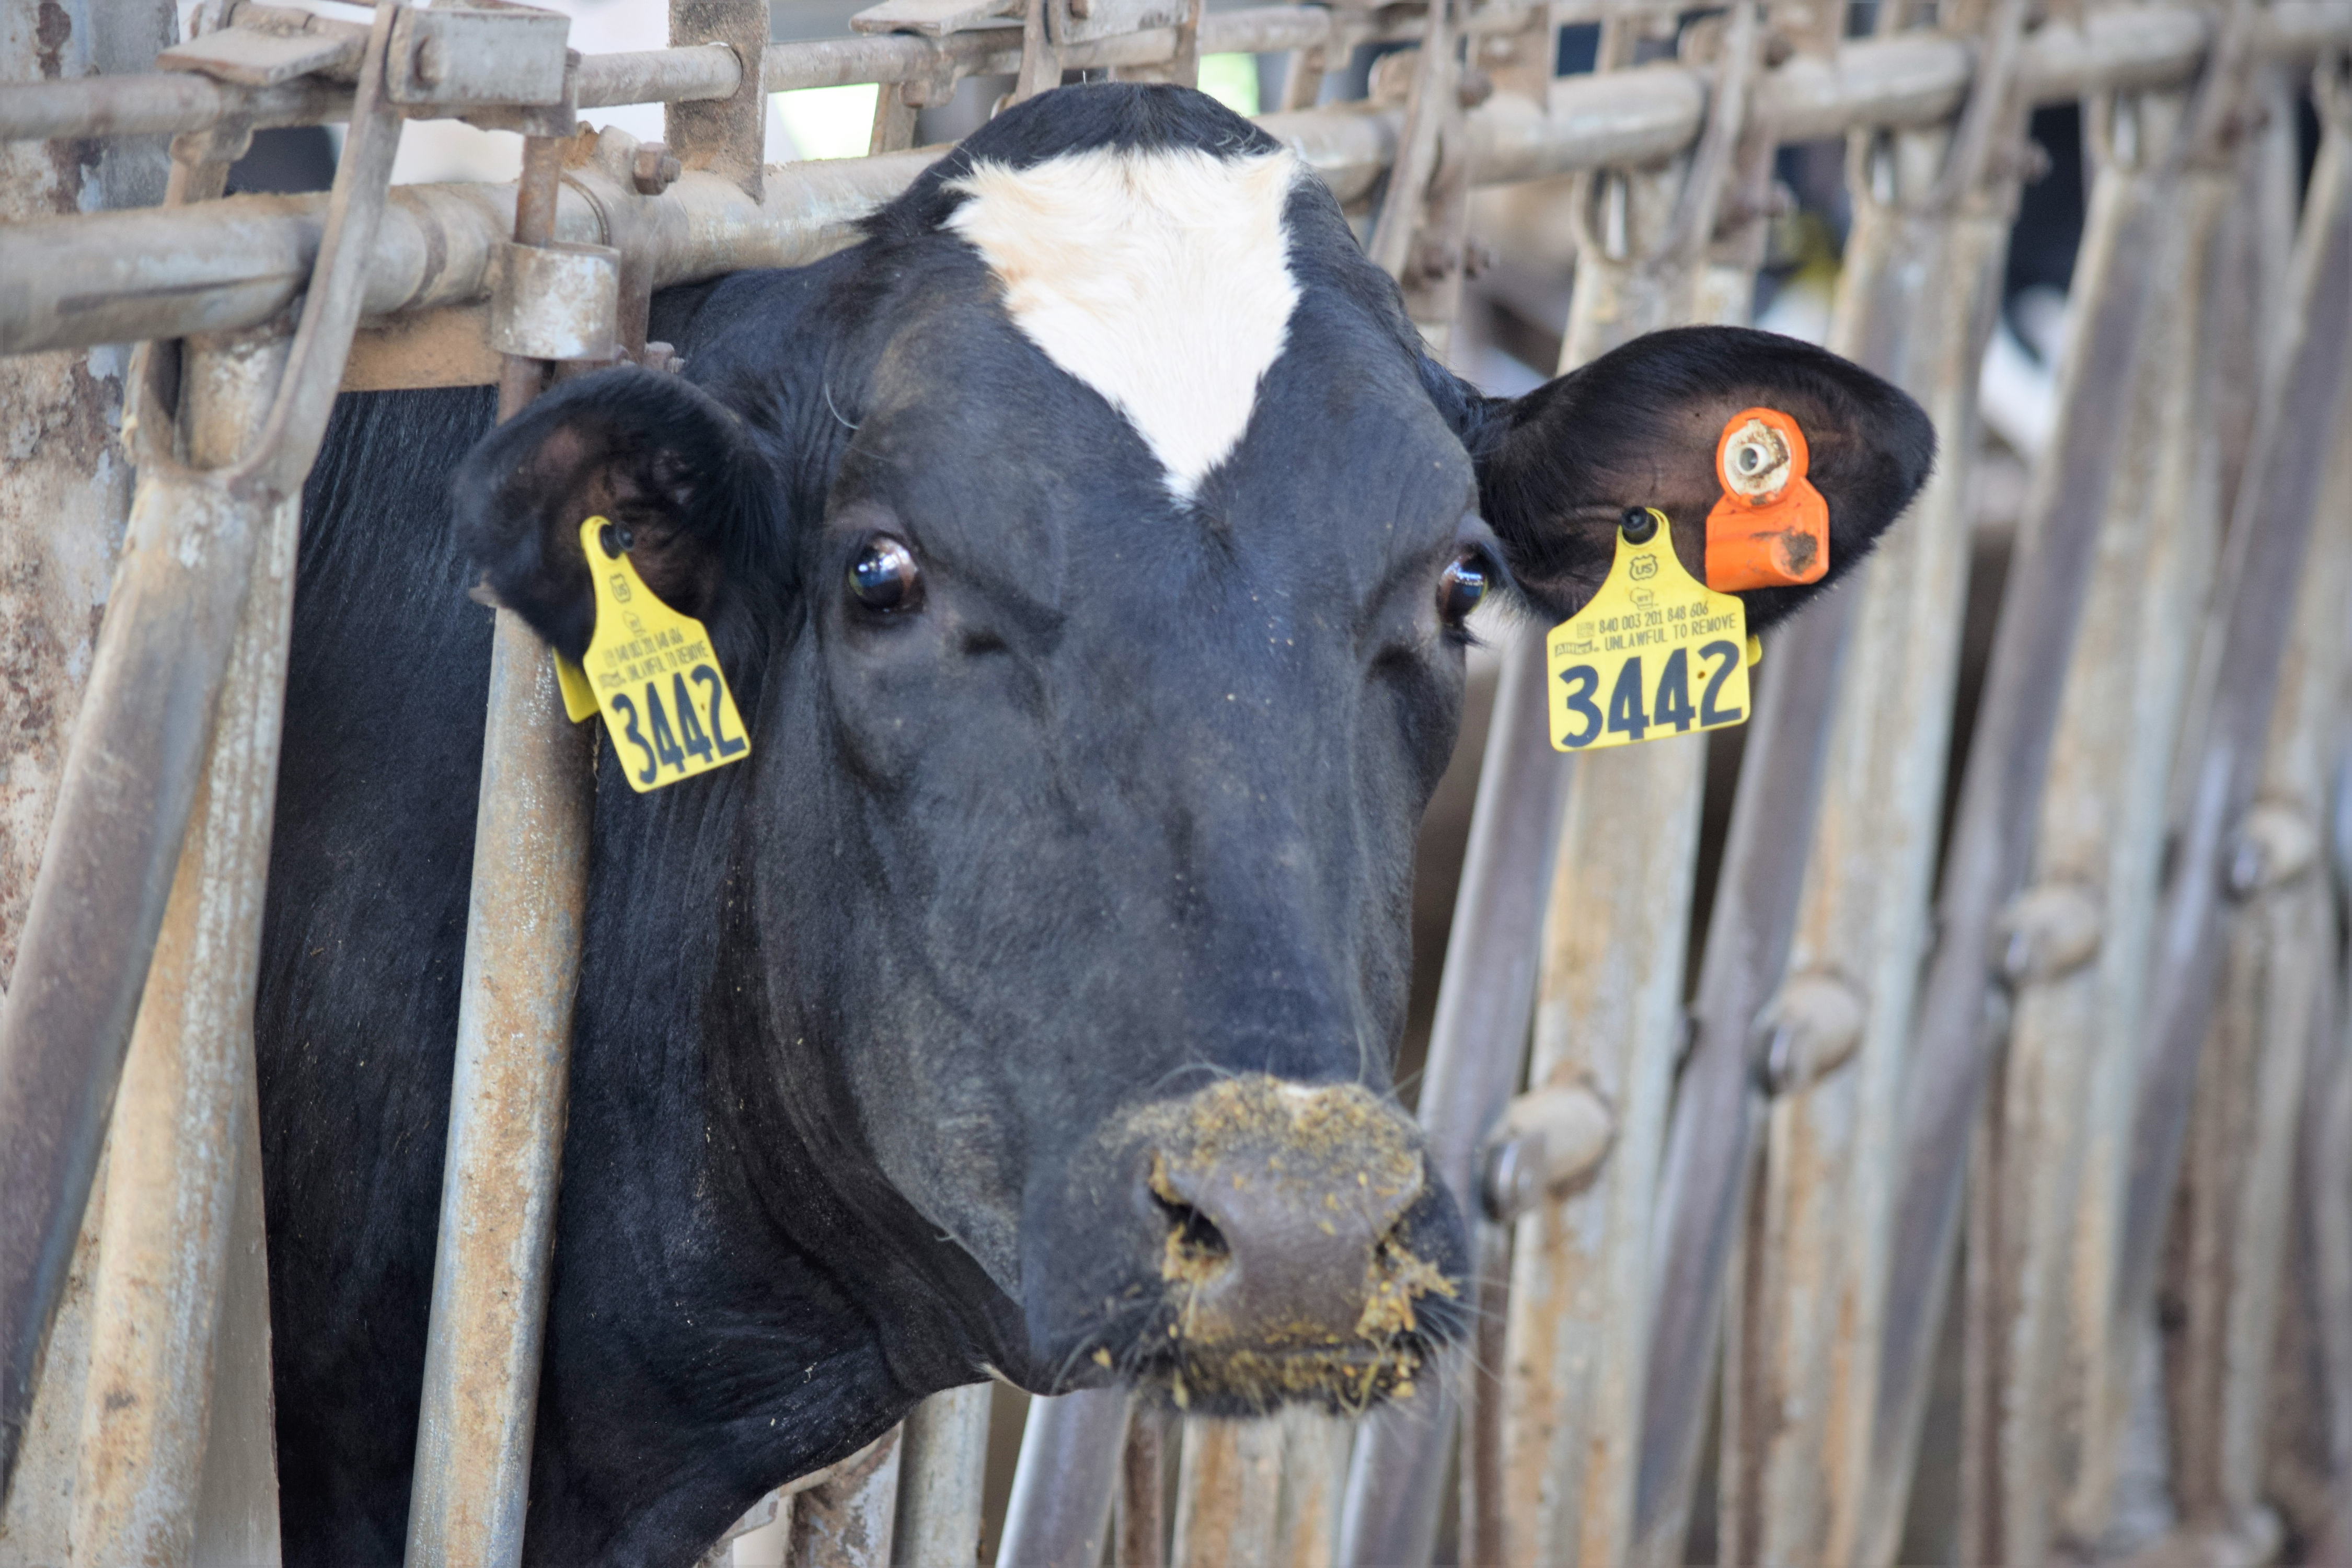 Report: Sweet spot temperature for cows